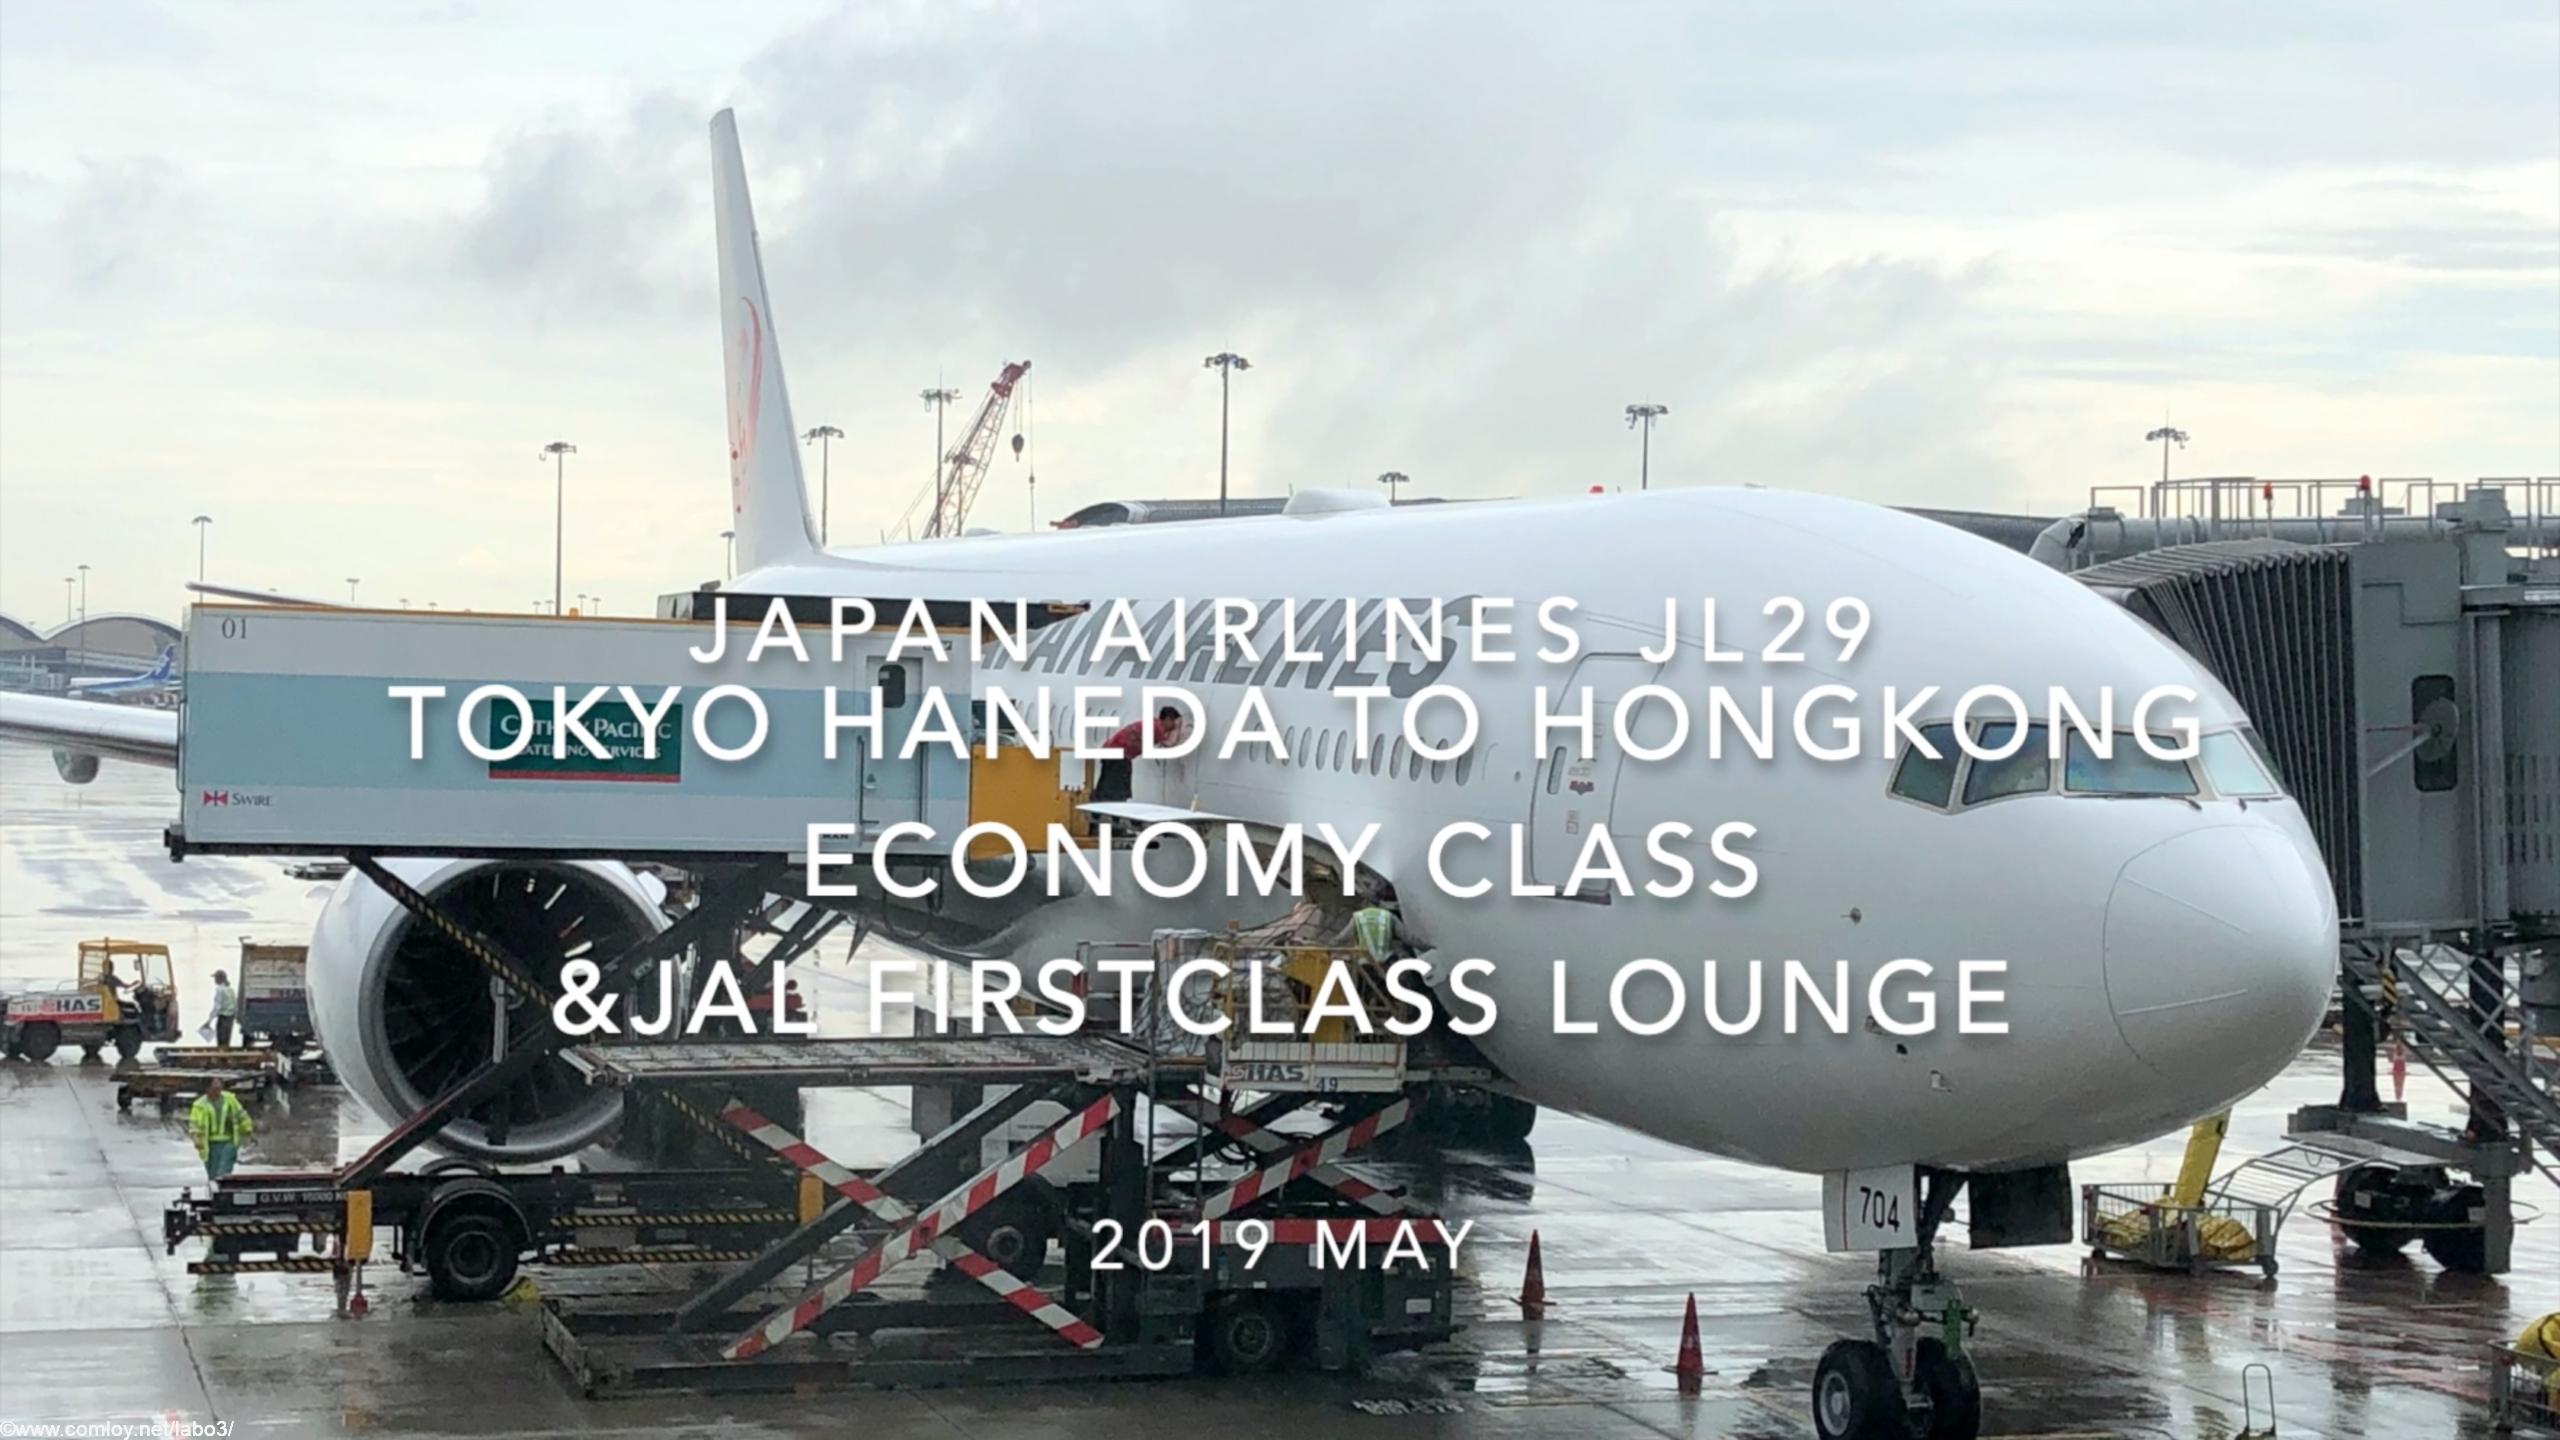 【Flight Report】Japan airlines JL29 TOKYO HANEDA TO HONGKONG ECONOMY Class & JAL First class lounge 2019 MAY 日本航空 羽田 - 香港 搭乗記